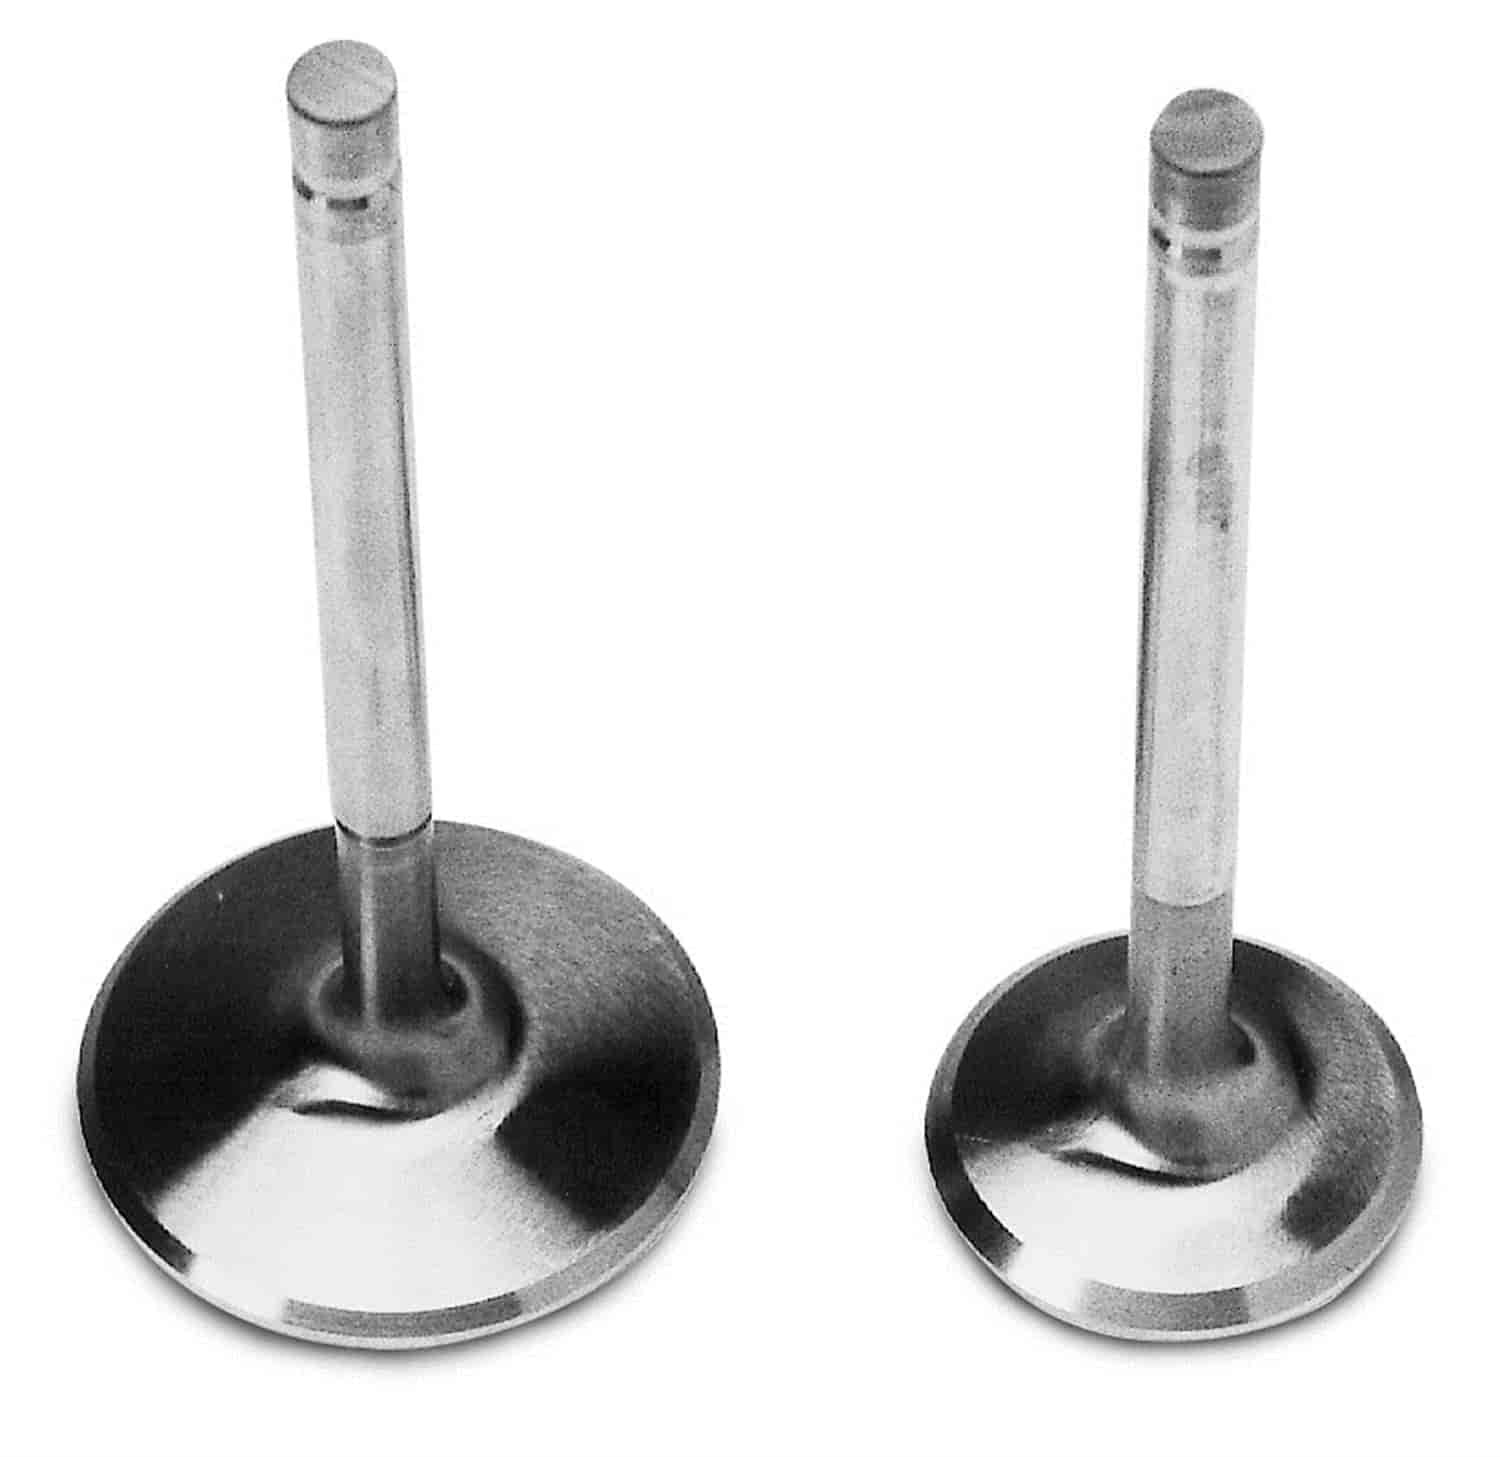 Single Intake Valve 2.08" for Small Block Chevy Victor Jr. Heads #350-776119, 350-77629, 350-77639, & 350-77649